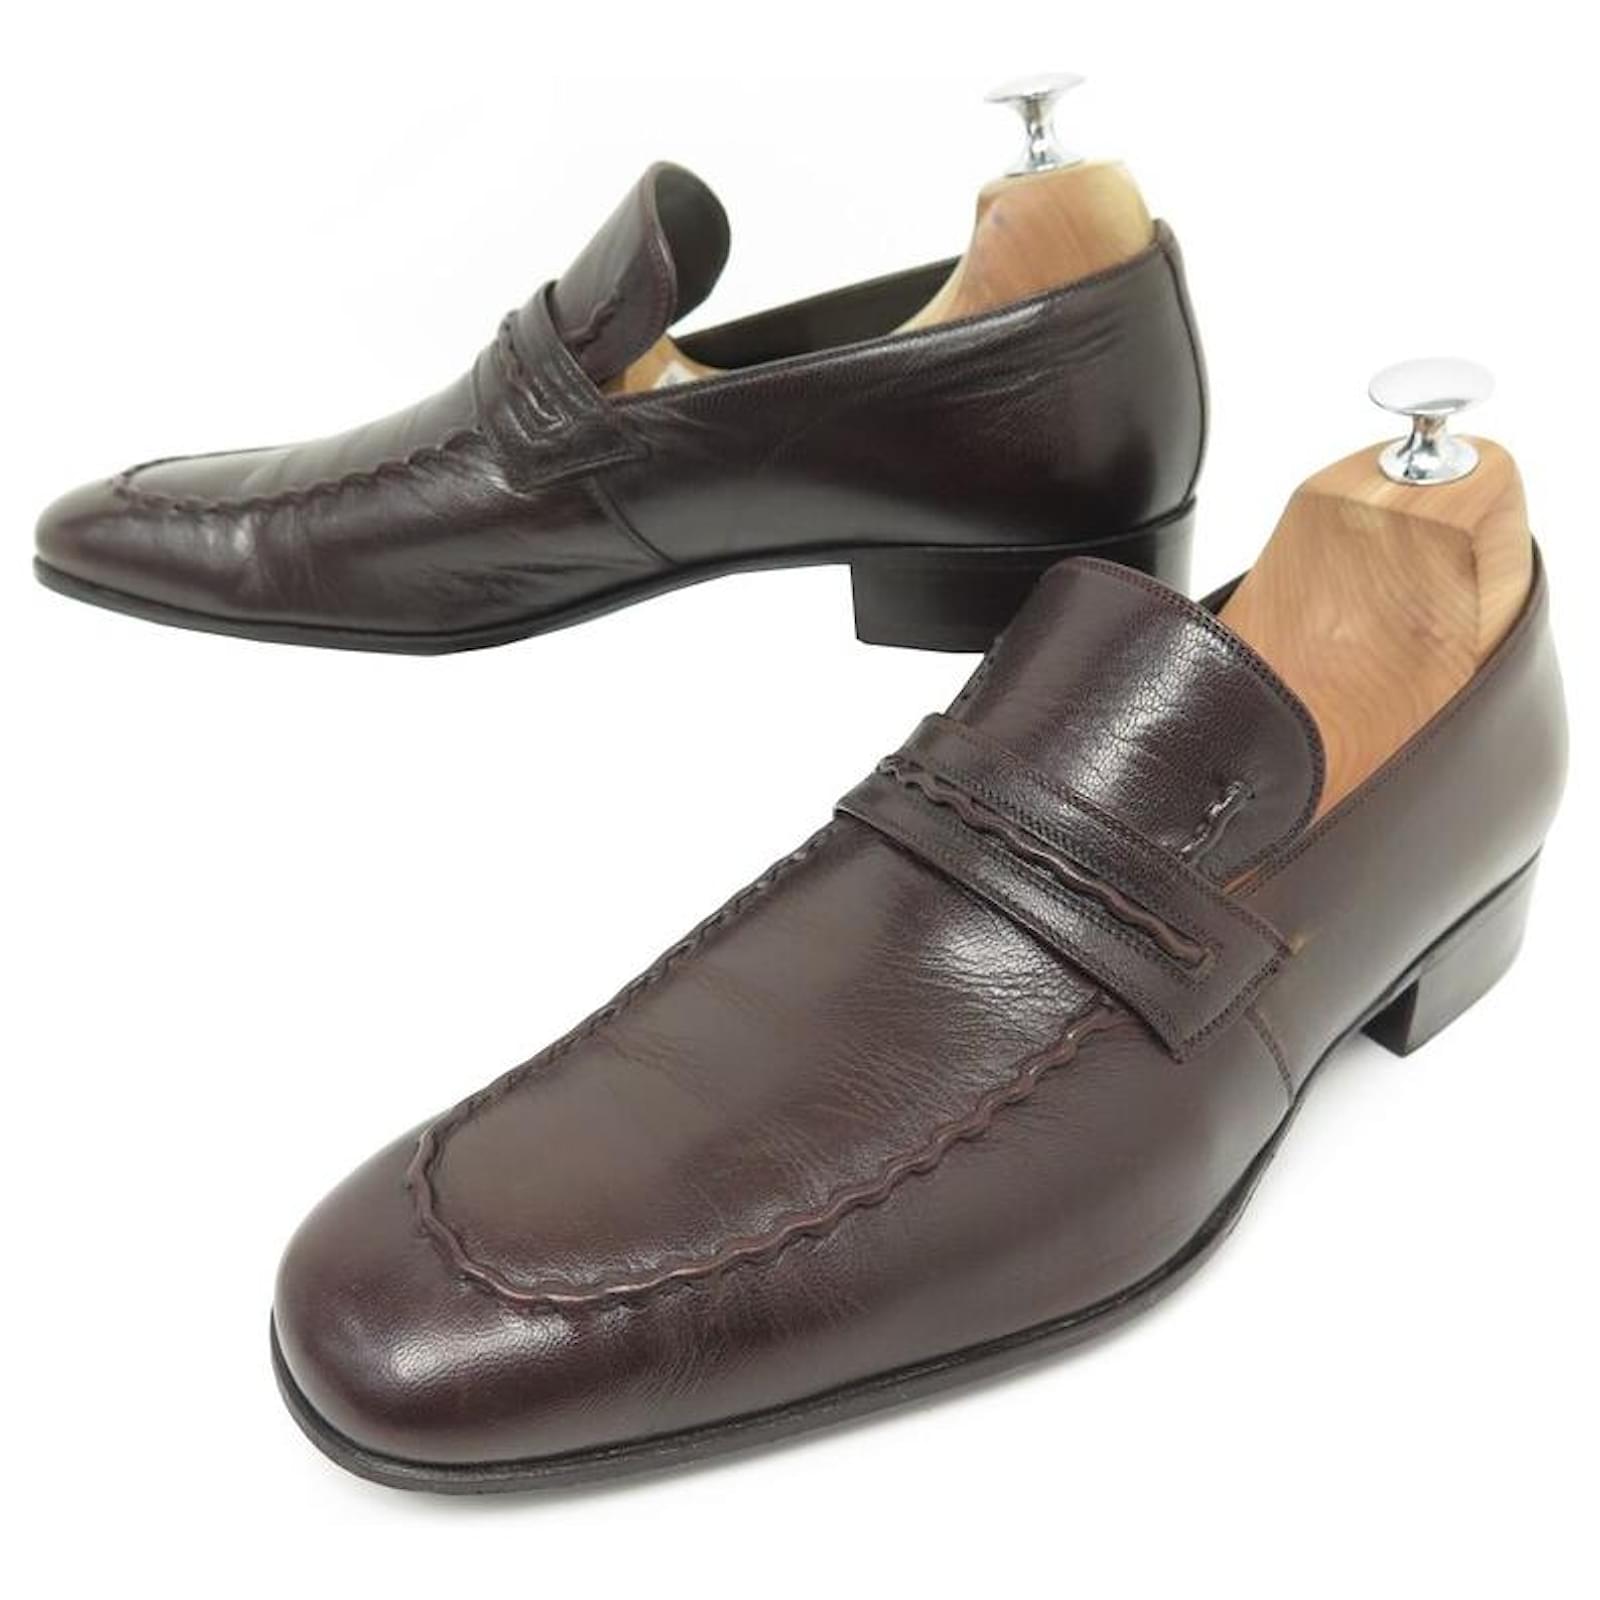 Church's Shoes is a name to know in fine, luxury footwear